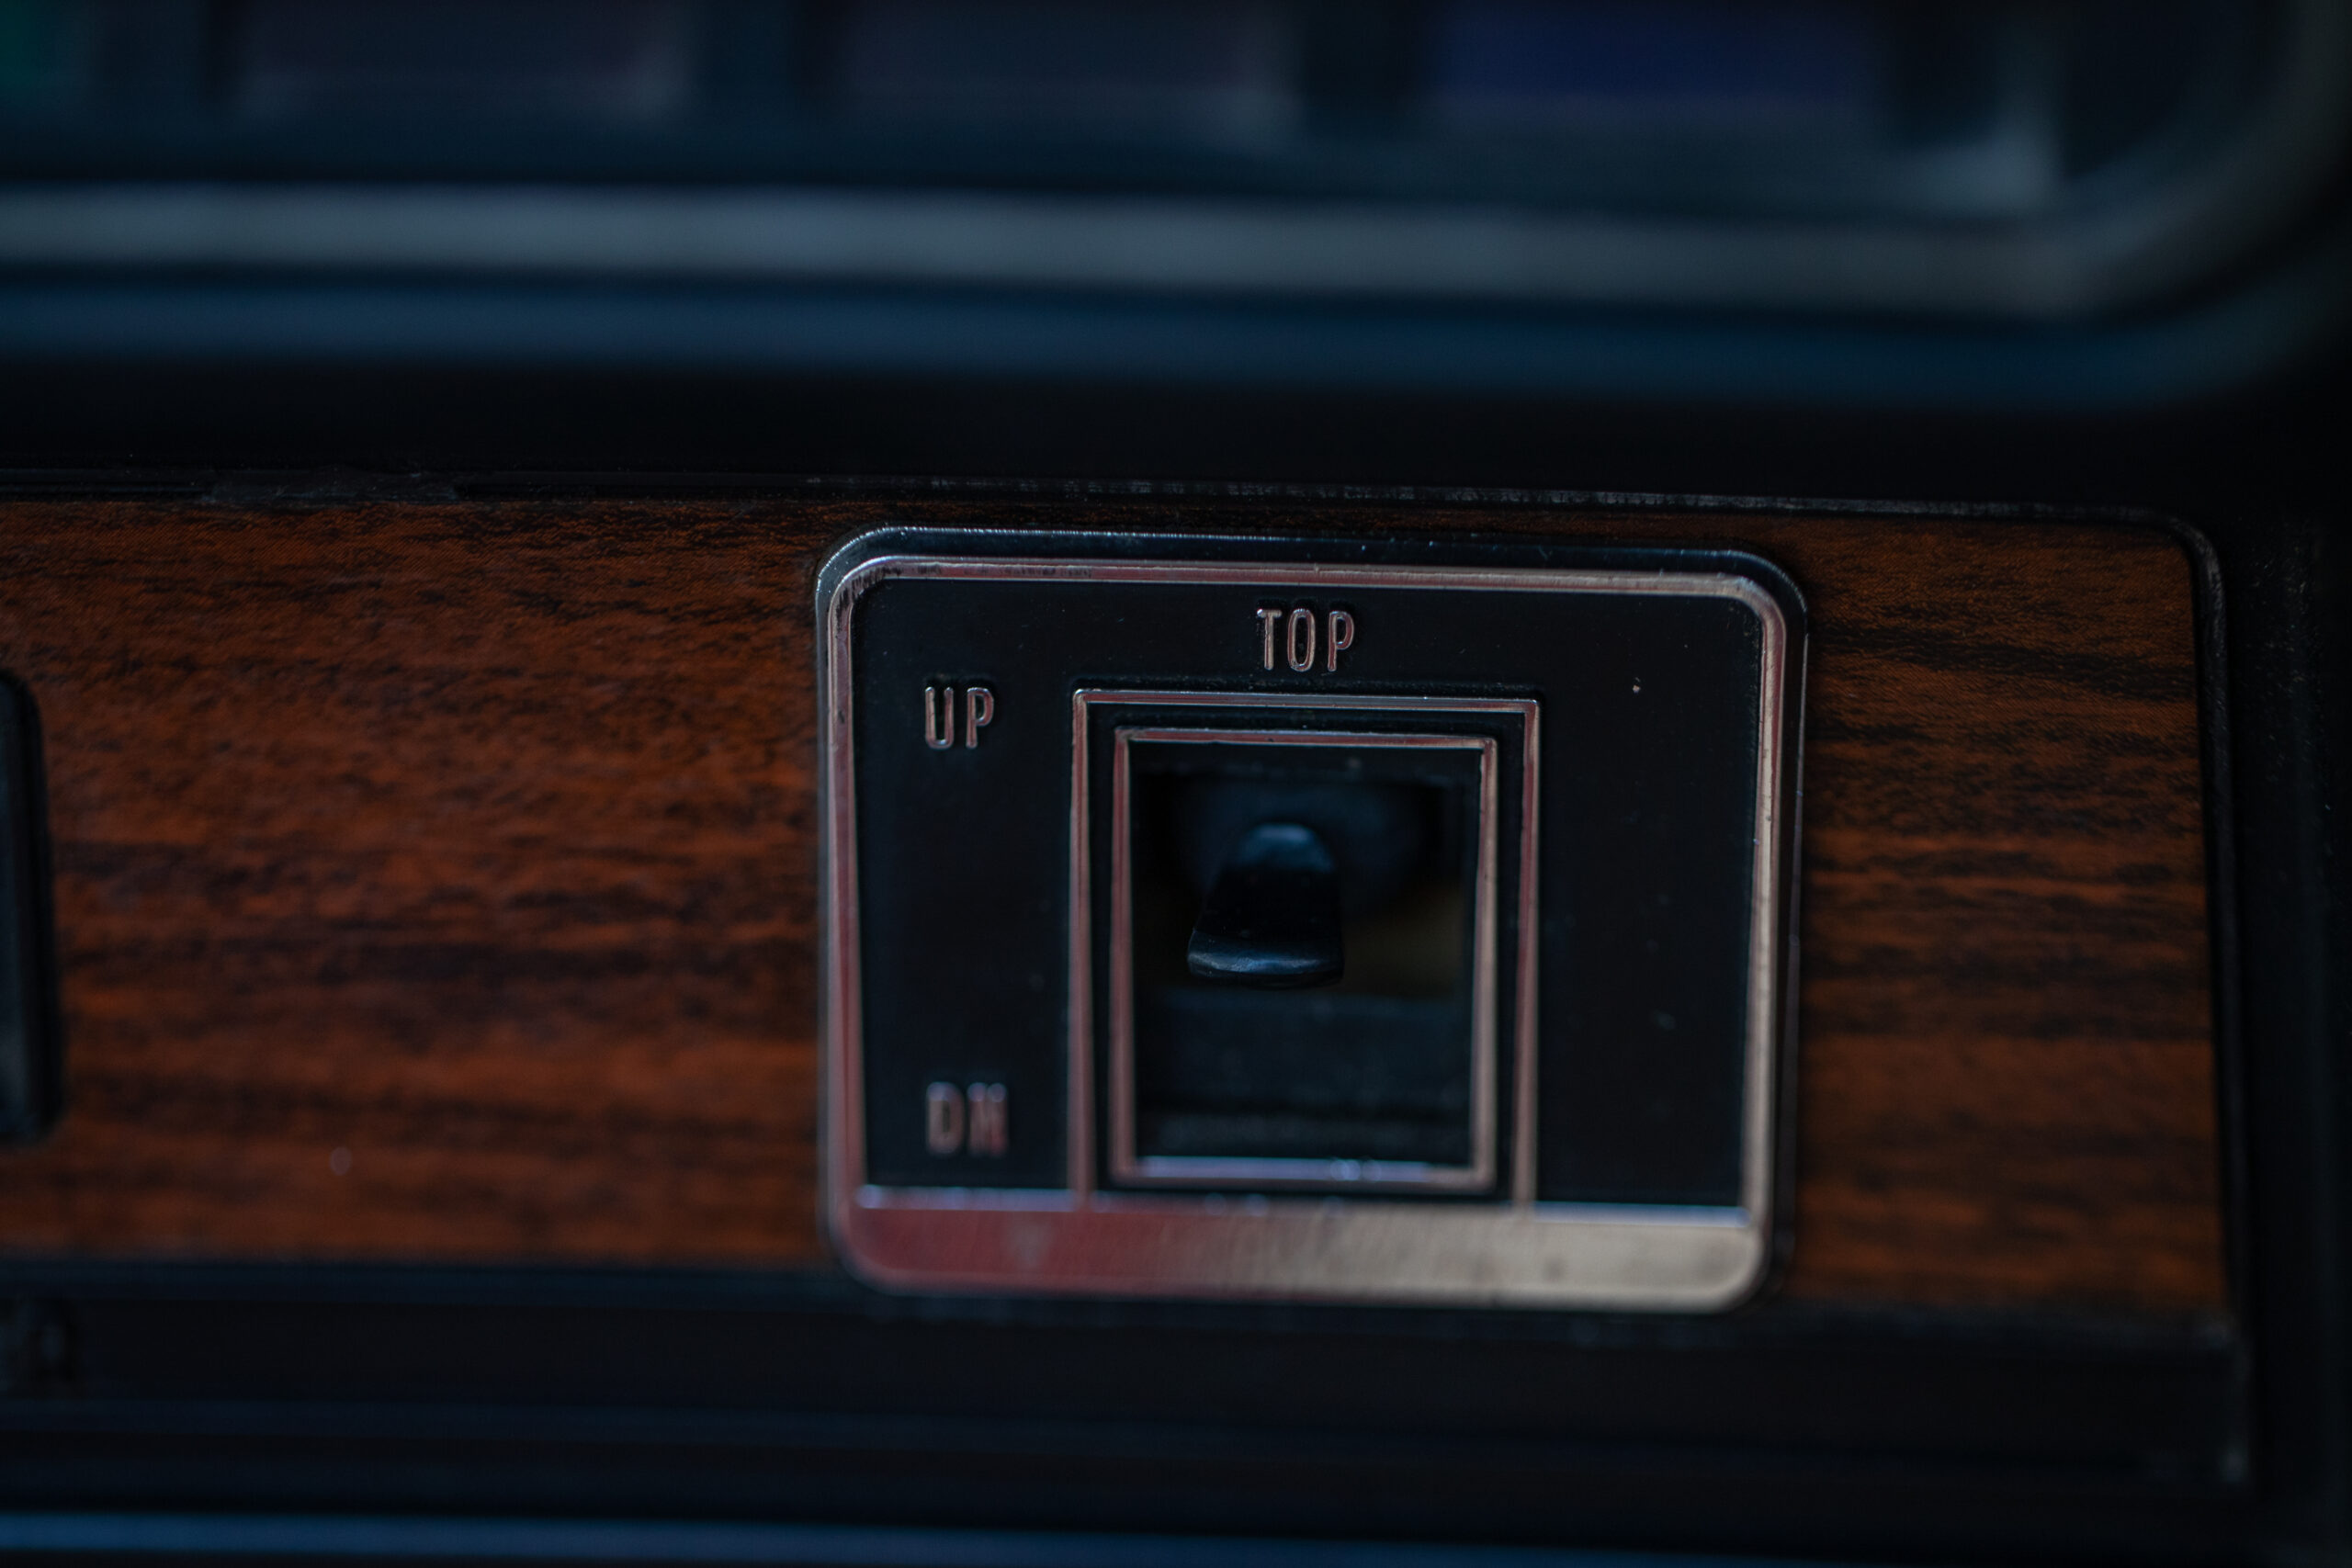 Close-up view of a car dashboard featuring a toggle switch for the convertible top, labeled "UP" and "DN," set against a woodgrain panel.